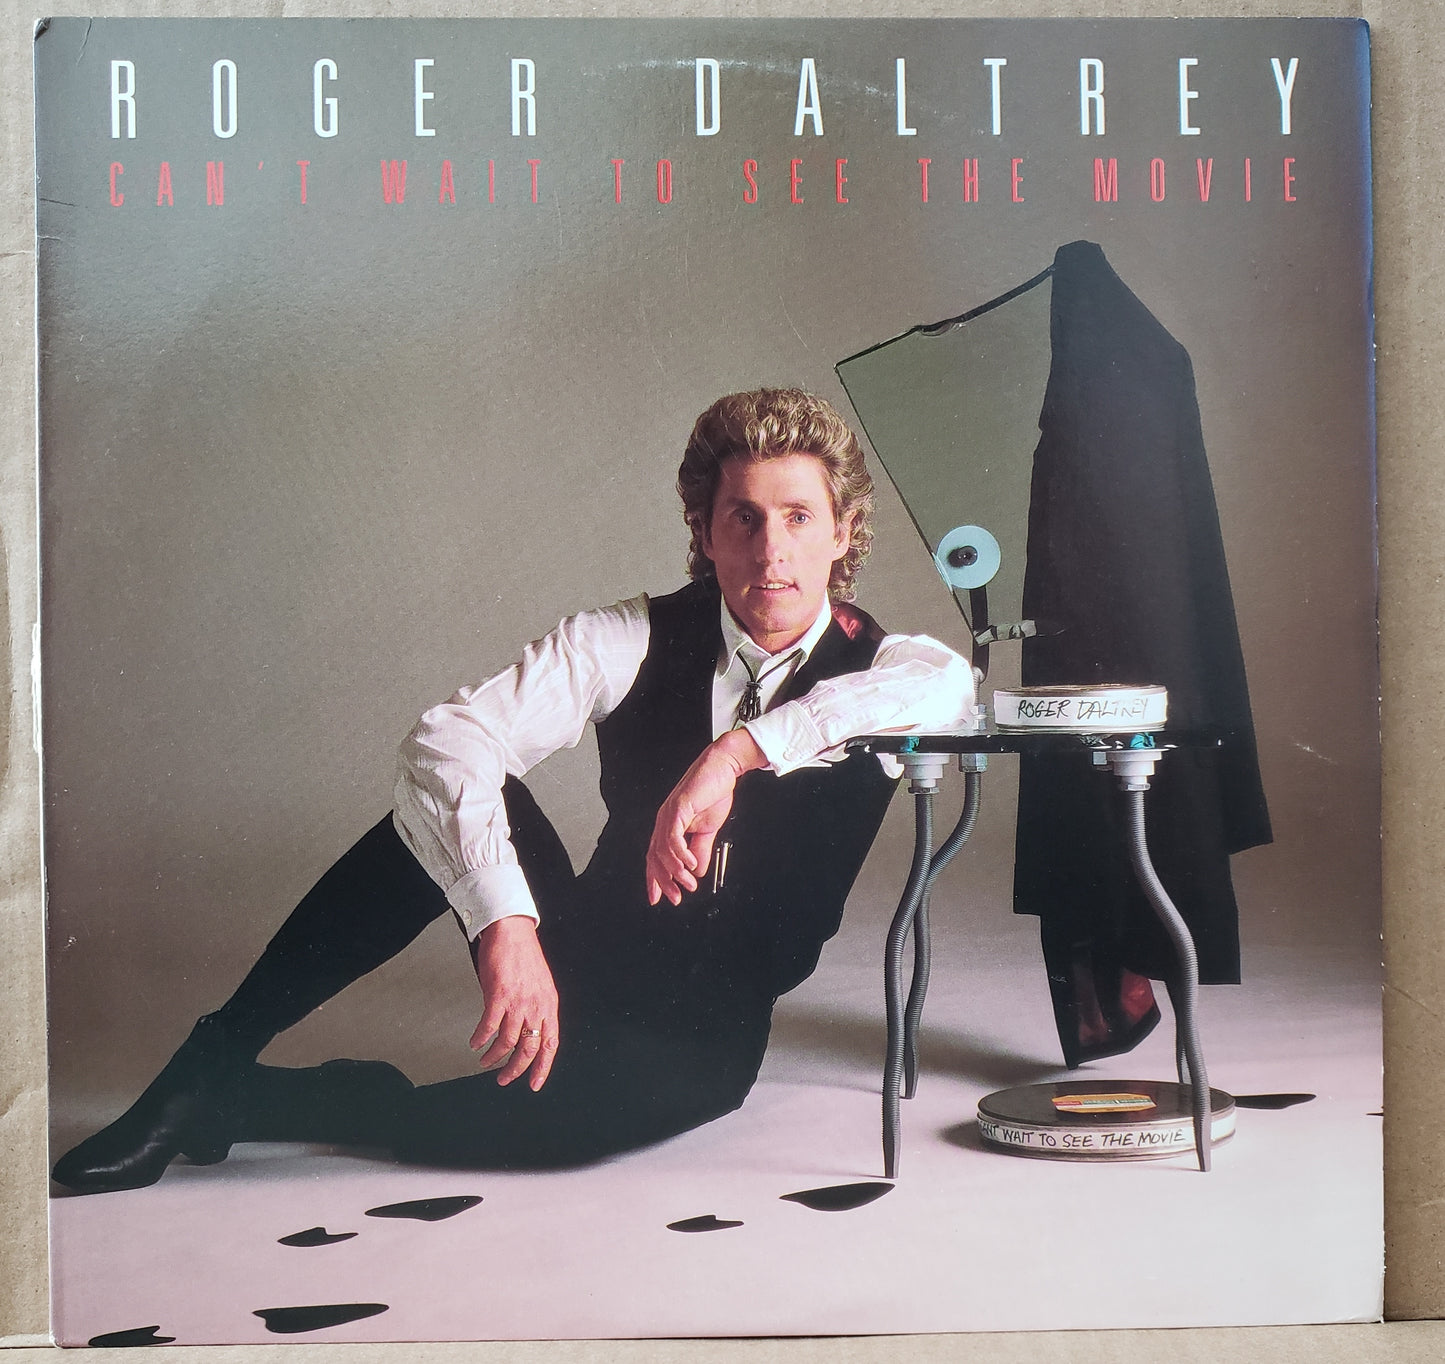 Roger Daltrey - Can't Wait to See the Movies [1987 Club] [Used Vinyl Record LP]